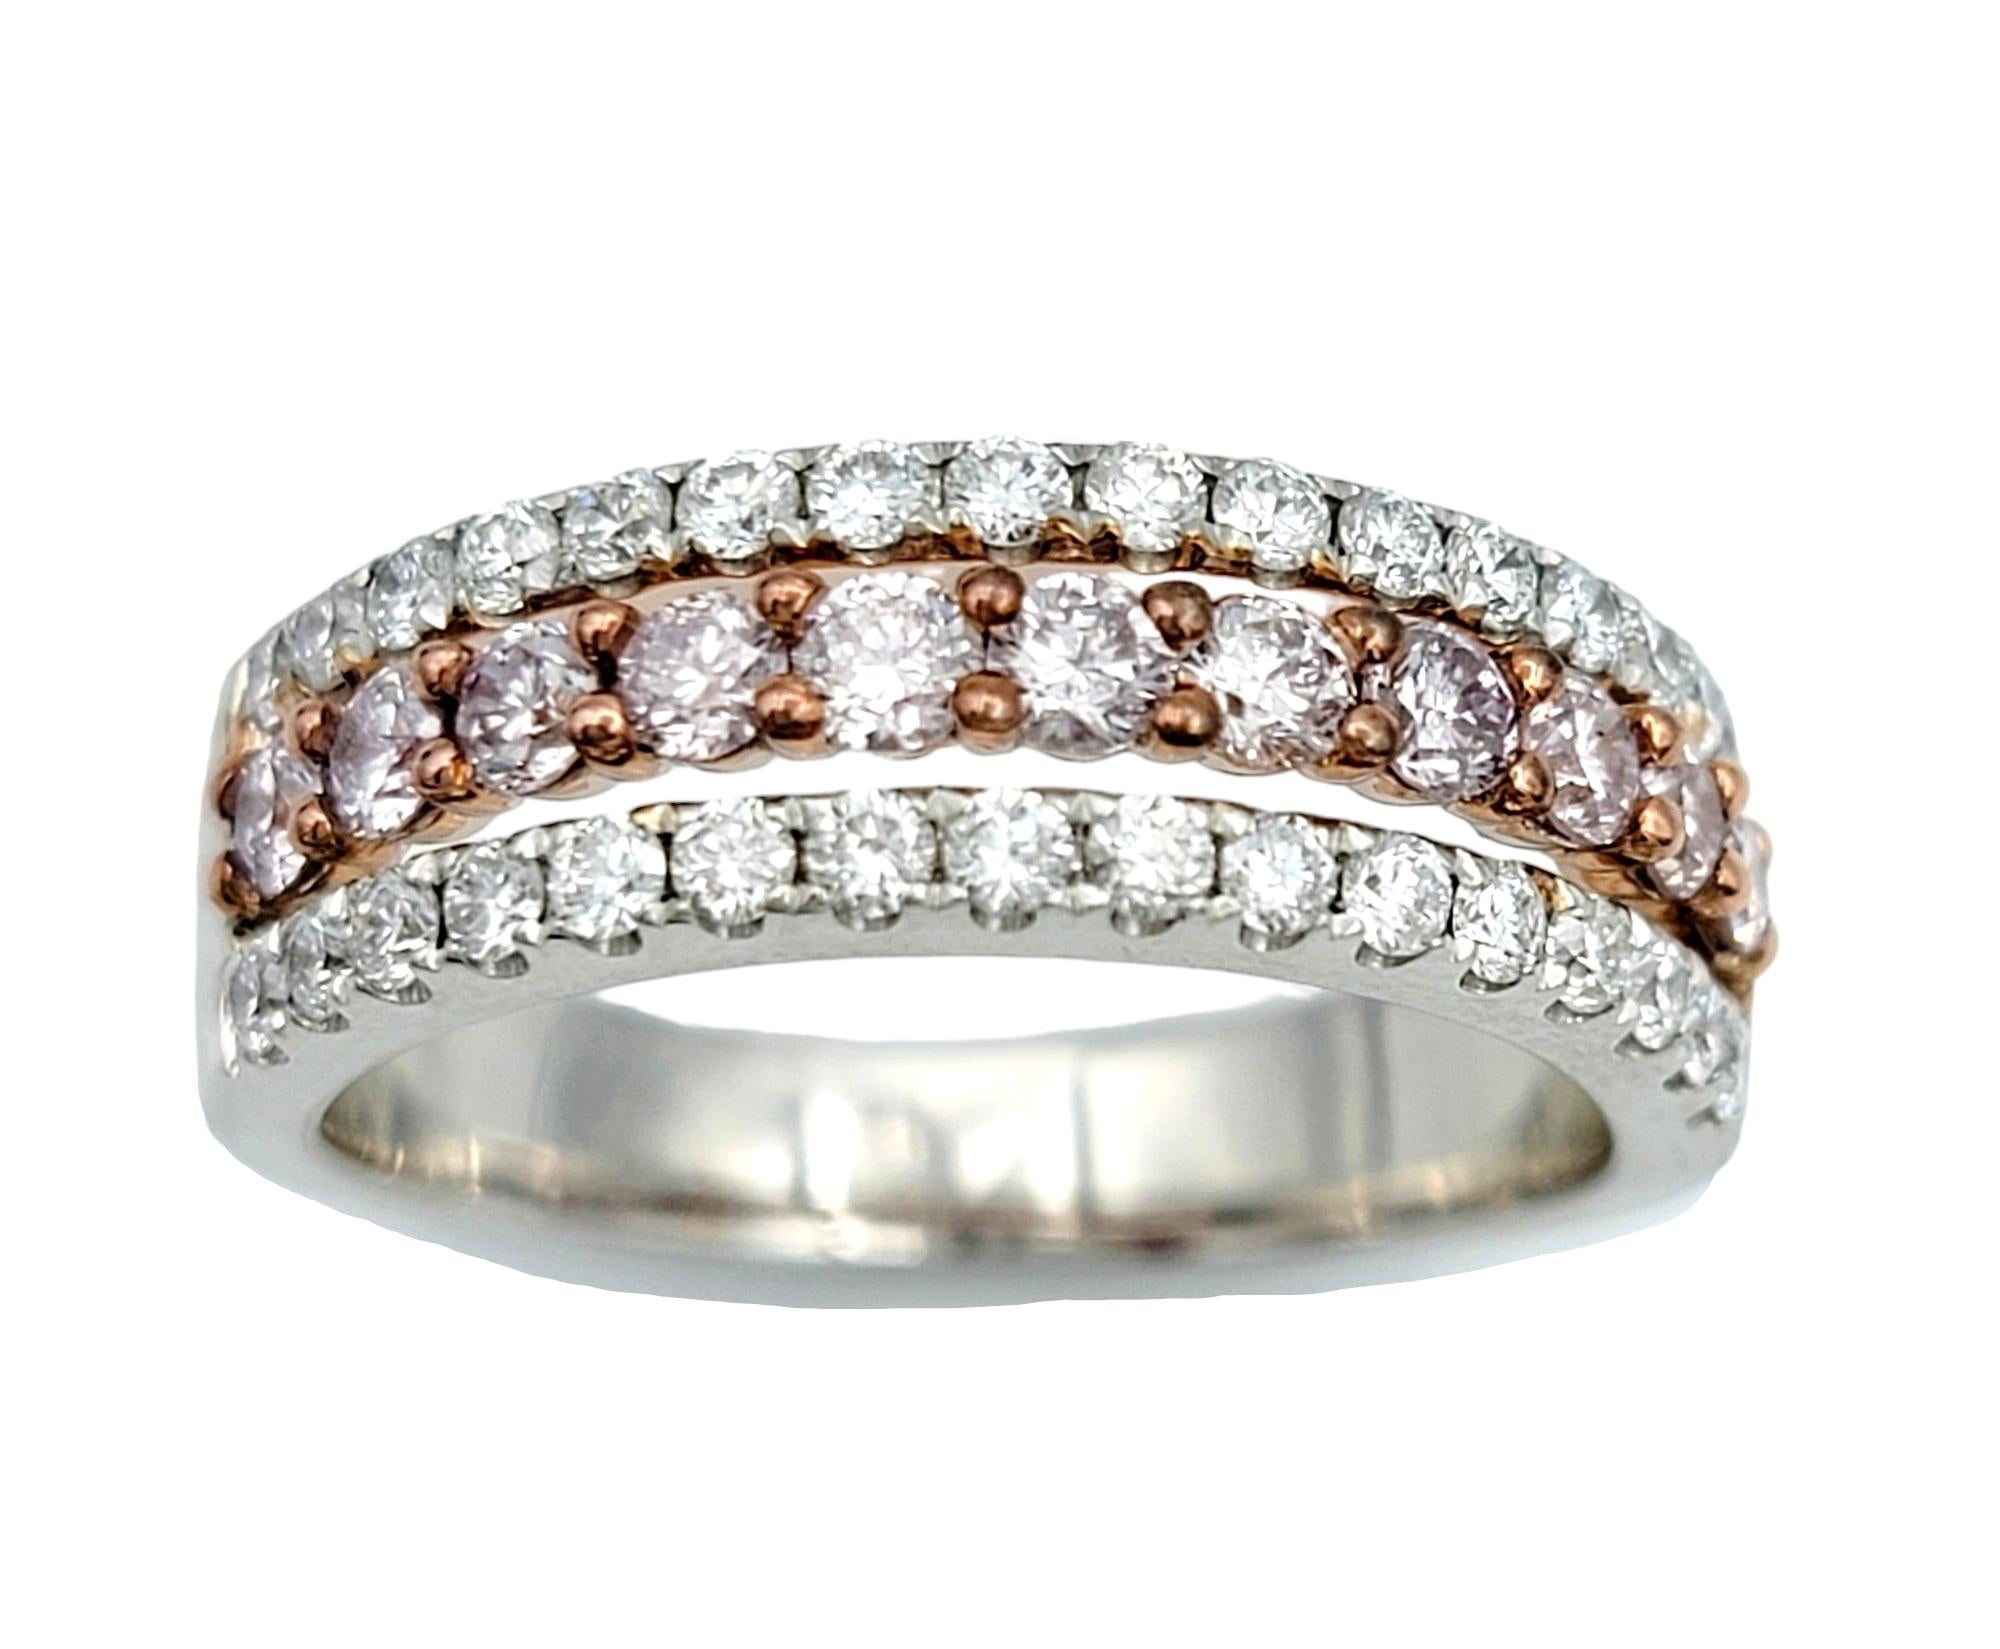 Ring size: 7

Introducing our enchanting multi-row pave diamond semi-eternity band ring, a captivating fusion of elegance and romance. Crafted in lustrous 18 karat white gold, this exquisite ring showcases three rows of meticulously set diamonds,